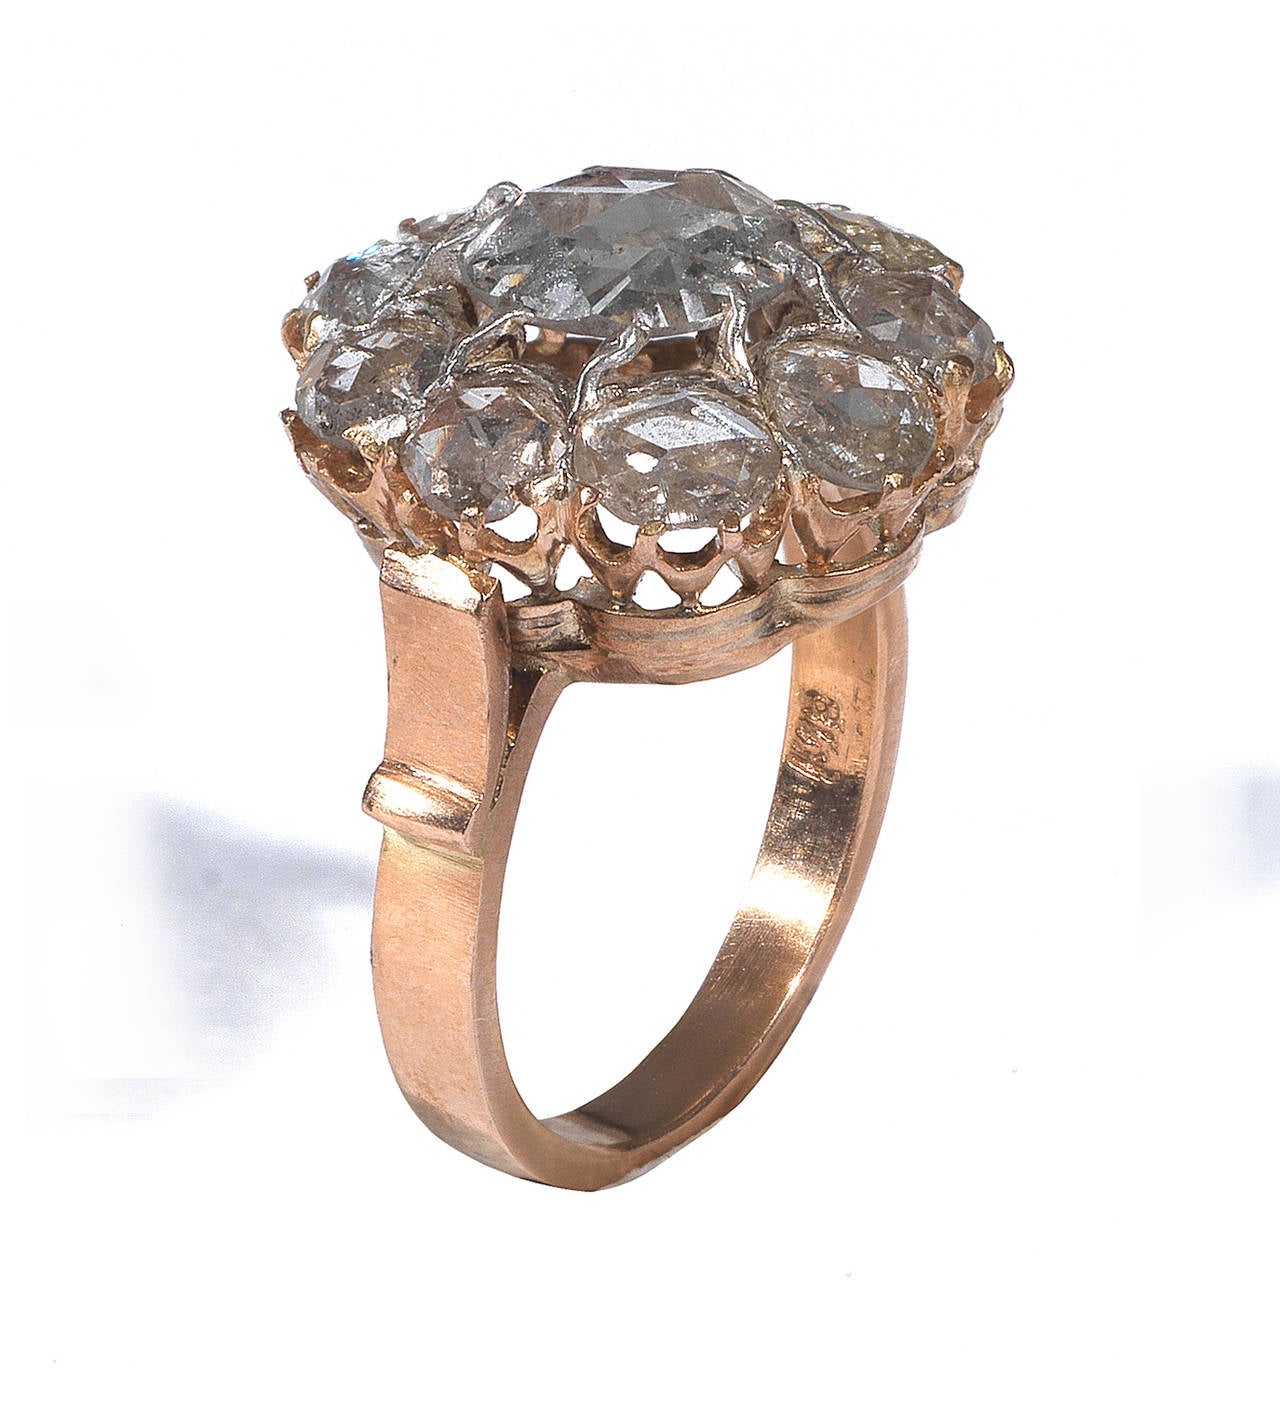 Of round outline, the central stone weighing approximately 1,5cts, it is bordered by nine smaller stones weighing approximately 0,90cts, claw set in 18kt yellow gold.
Weight: 5.9 gr
Size 7